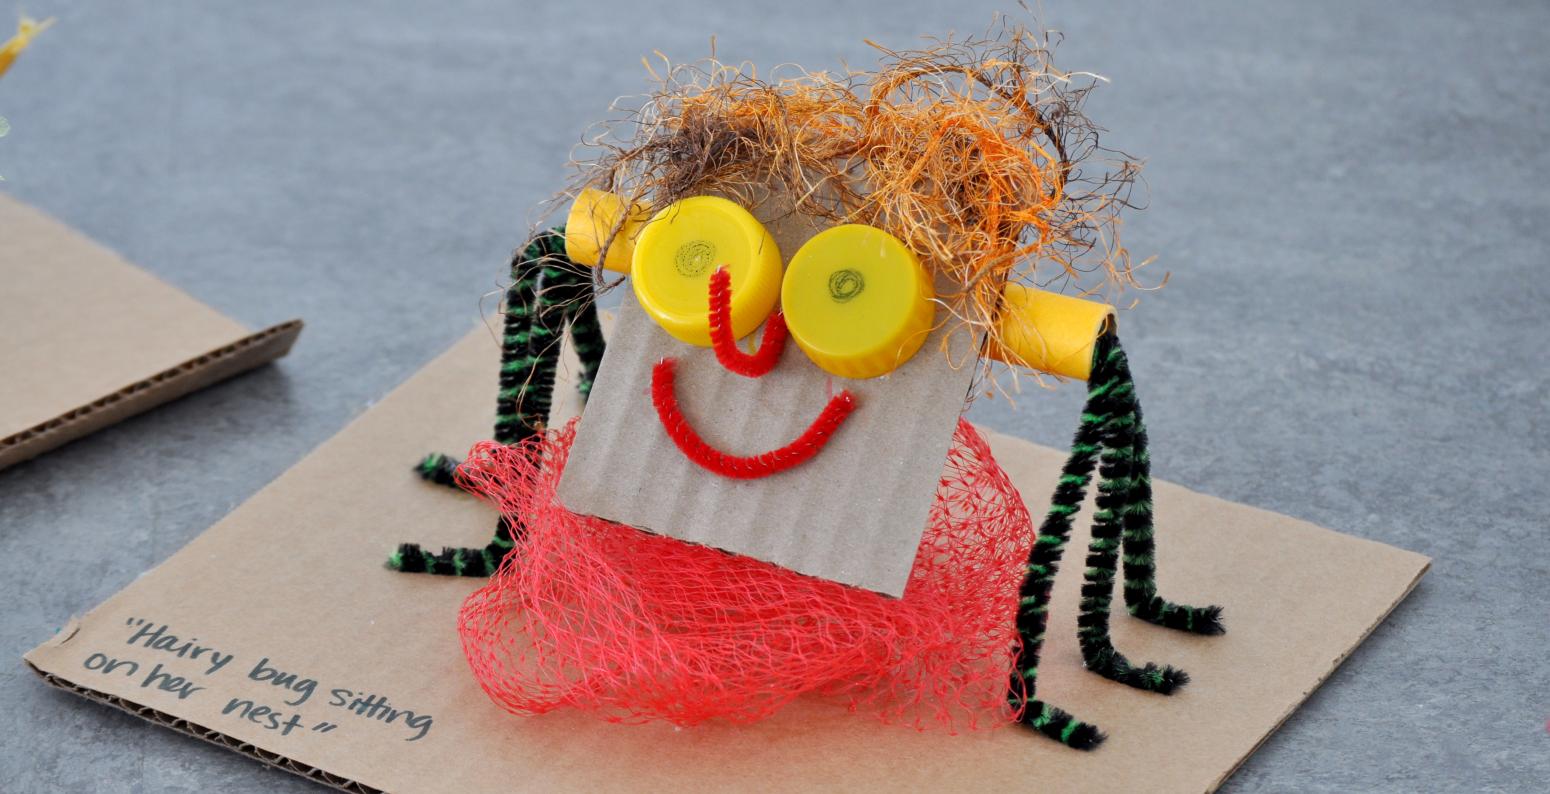 A smiling sculpture made of found materials with the title "Hairy bug sitting on her nest."